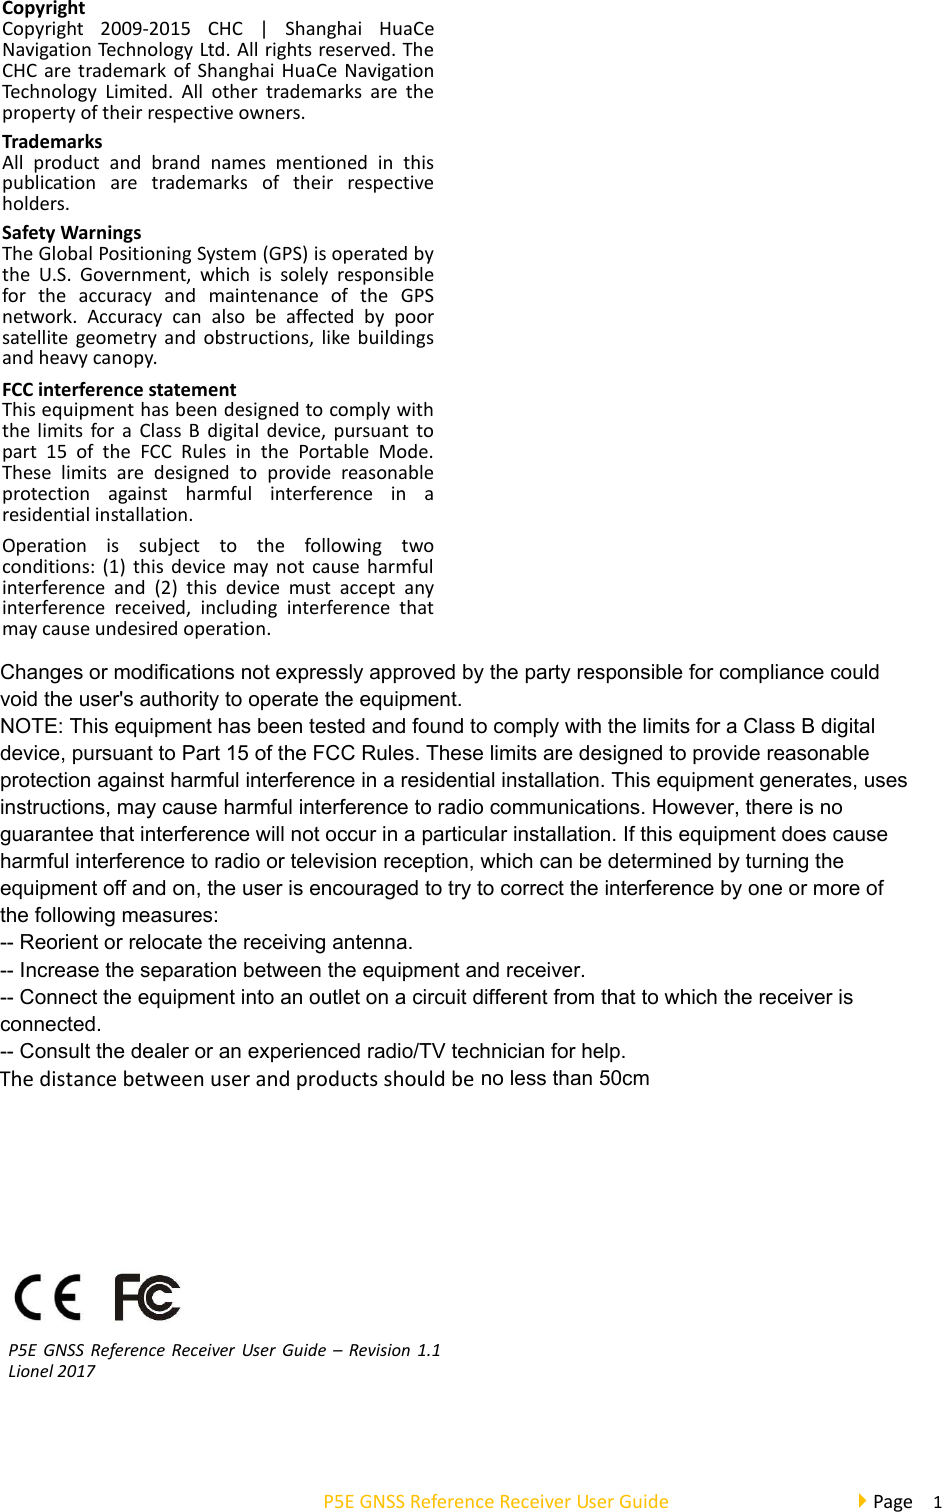  P5E GNSS Reference Receiver User Guide                                     Page    1 Copyright   Copyright  2009-2015  CHC  |  Shanghai  HuaCe Navigation Technology Ltd. All rights reserved. The CHC are trademark of Shanghai HuaCe Navigation Technology  Limited.  All  other  trademarks  are  the property of their respective owners.  Trademarks All  product  and  brand  names  mentioned  in  this publication  are  trademarks  of  their  respective holders.  Safety Warnings The Global Positioning System (GPS) is operated by the  U.S.  Government,  which  is  solely  responsible for  the  accuracy  and  maintenance  of  the  GPS network.  Accuracy  can  also  be  affected  by  poor satellite geometry and  obstructions,  like  buildings and heavy canopy.  FCC interference statement This equipment has been designed to comply with the limits for a  Class B digital device,  pursuant  to part  15  of  the  FCC  Rules  in  the  Portable  Mode. These  limits  are  designed  to  provide  reasonable protection  against  harmful  interference  in  a residential installation.  Operation  is  subject  to  the  following  two conditions: (1) this  device may not cause harmful interference  and  (2)  this  device  must  accept  any interference  received,  including  interference  that may cause undesired operation.       P5E  GNSS Reference Receiver User  Guide  –  Revision 1.1 Lionel 2017                 The distance between user and products should be no less than 50cmChanges or modifications not expressly approved by the party responsible for compliance couldvoid the user&apos;s authority to operate the equipment.NOTE: This equipment has been tested and found to comply with the limits for a Class B digitaldevice, pursuant to Part 15 of the FCC Rules. These limits are designed to provide reasonableprotection against harmful interference in a residential installation. This equipment generates, usesinstructions, may cause harmful interference to radio communications. However, there is noguarantee that interference will not occur in a particular installation. If this equipment does causeharmful interference to radio or television reception, which can be determined by turning theequipment off and on, the user is encouraged to try to correct the interference by one or more ofthe following measures:-- Reorient or relocate the receiving antenna.-- Increase the separation between the equipment and receiver.-- Connect the equipment into an outlet on a circuit different from that to which the receiver isconnected.-- Consult the dealer or an experienced radio/TV technician for help.